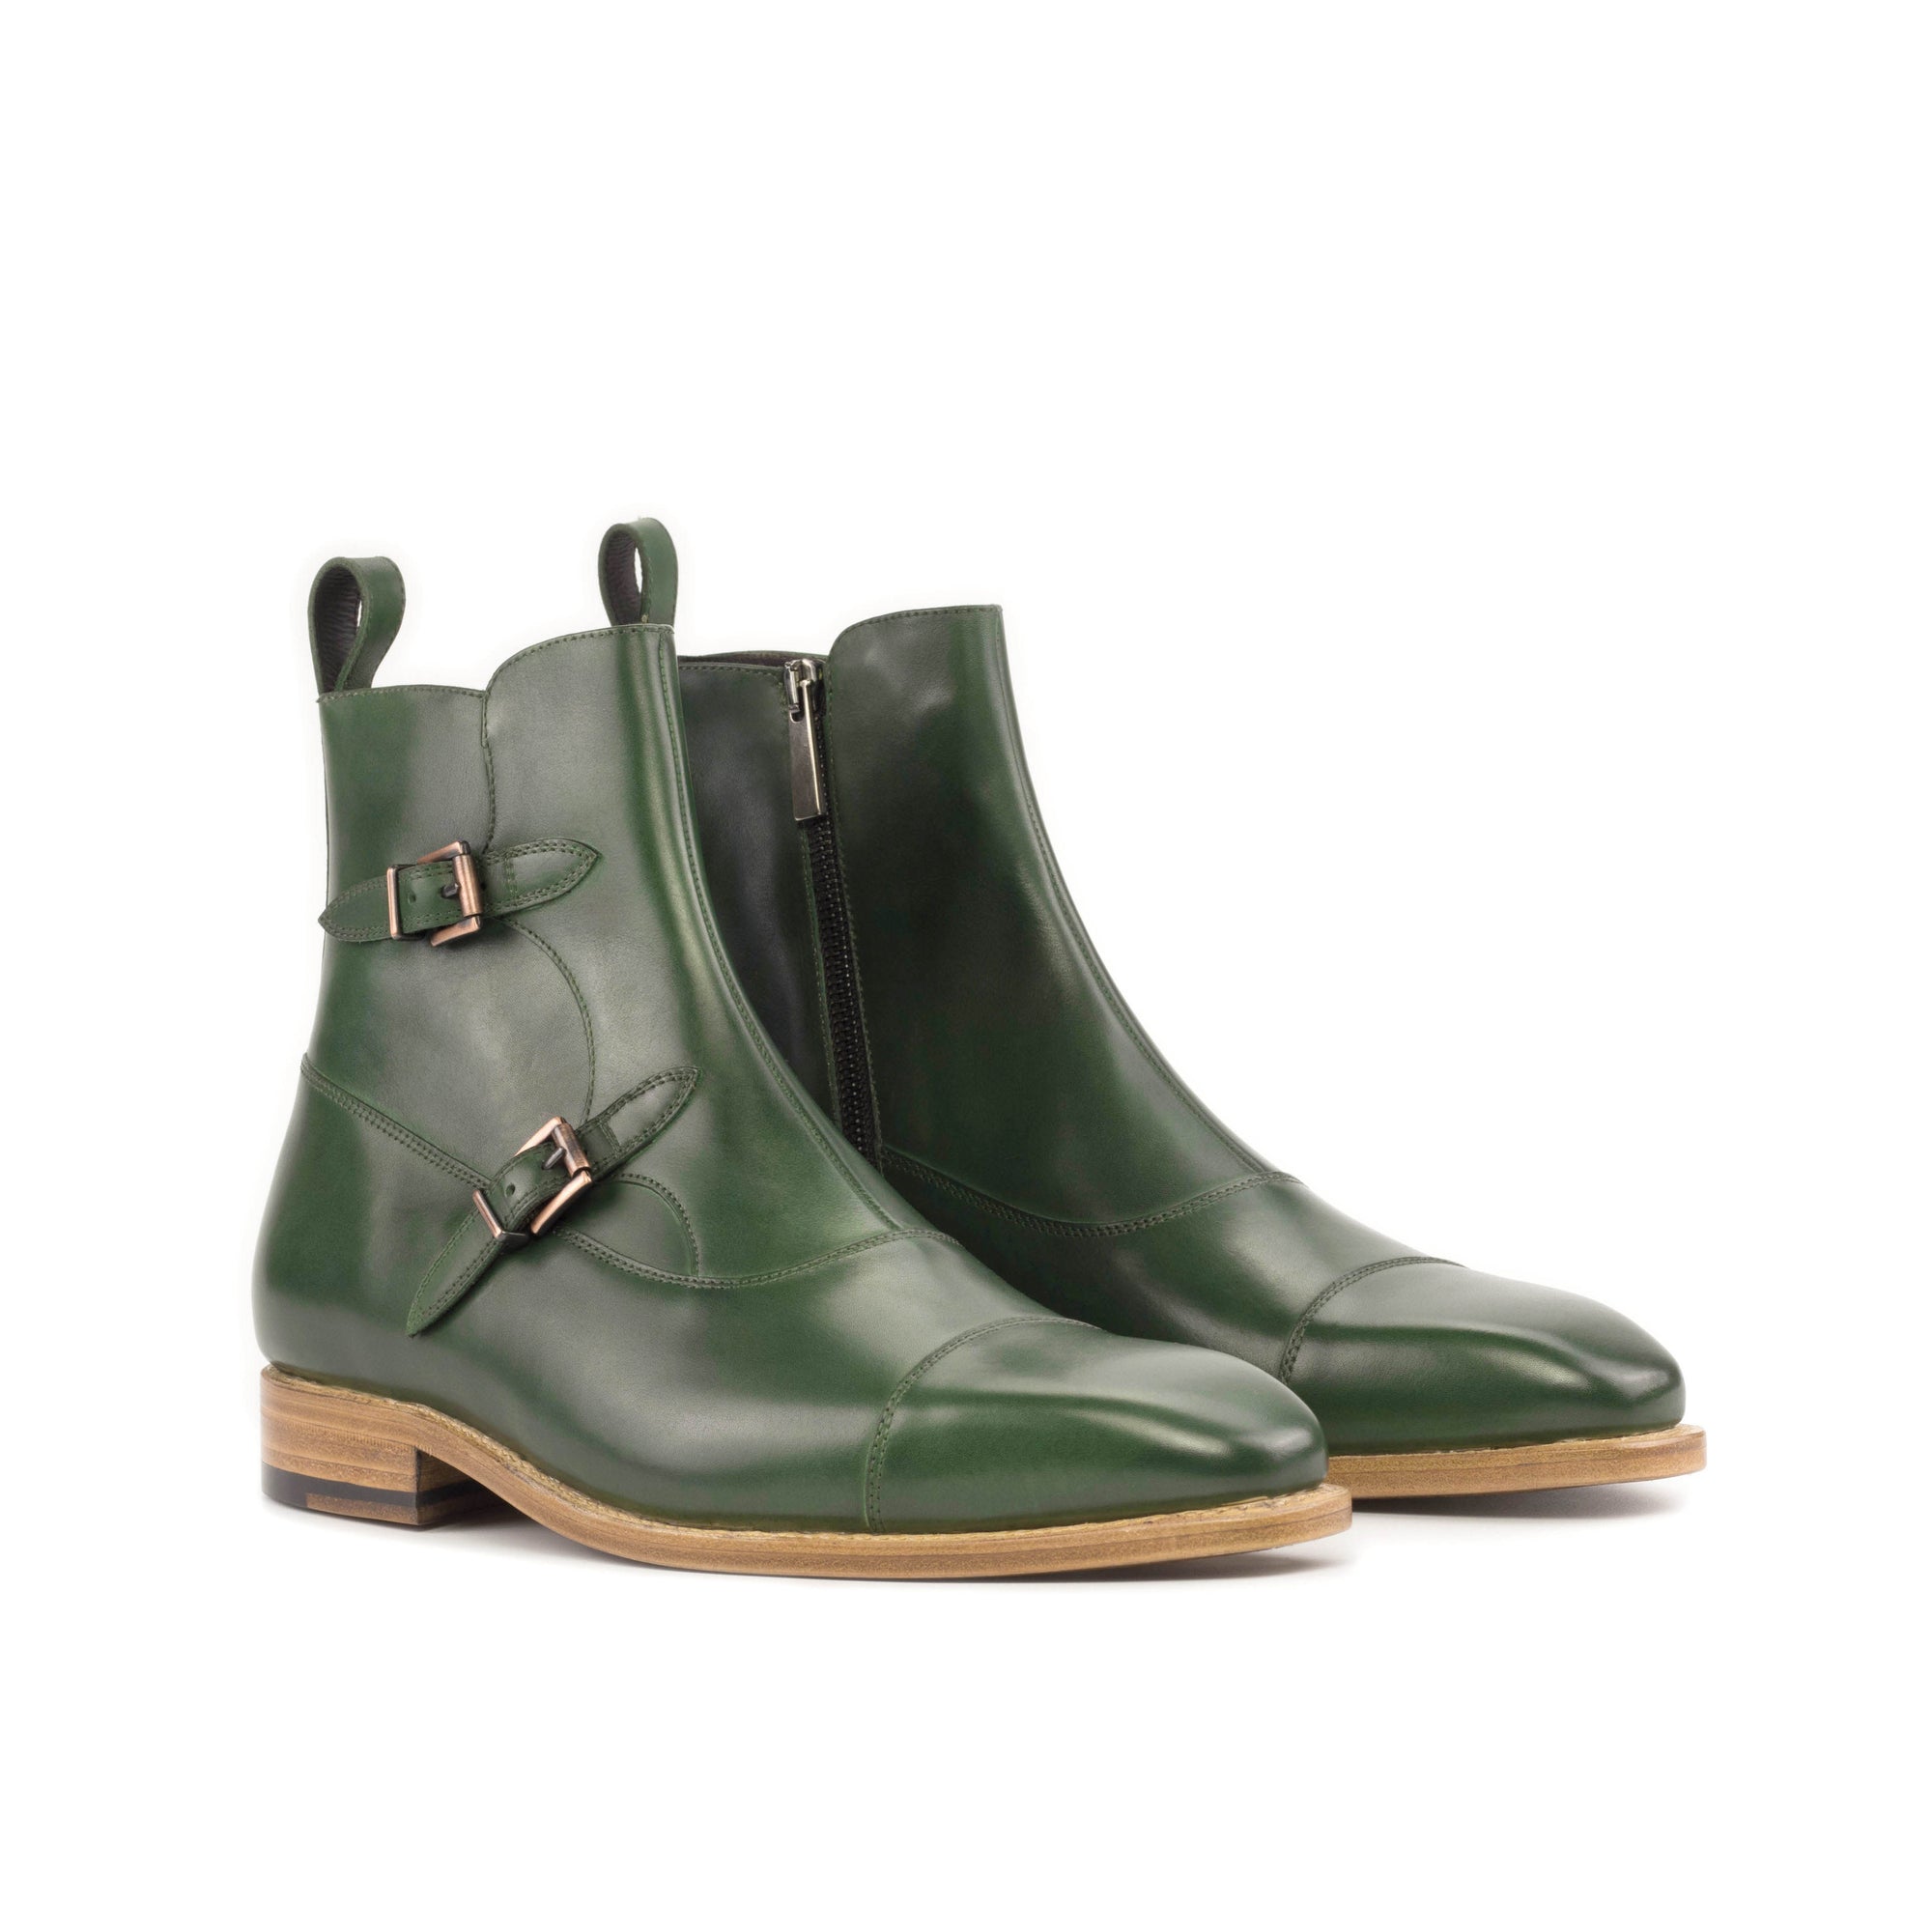 Emerald Octavian Luxury Leather Boot, Leather Boot with Buckle and Leather Sole